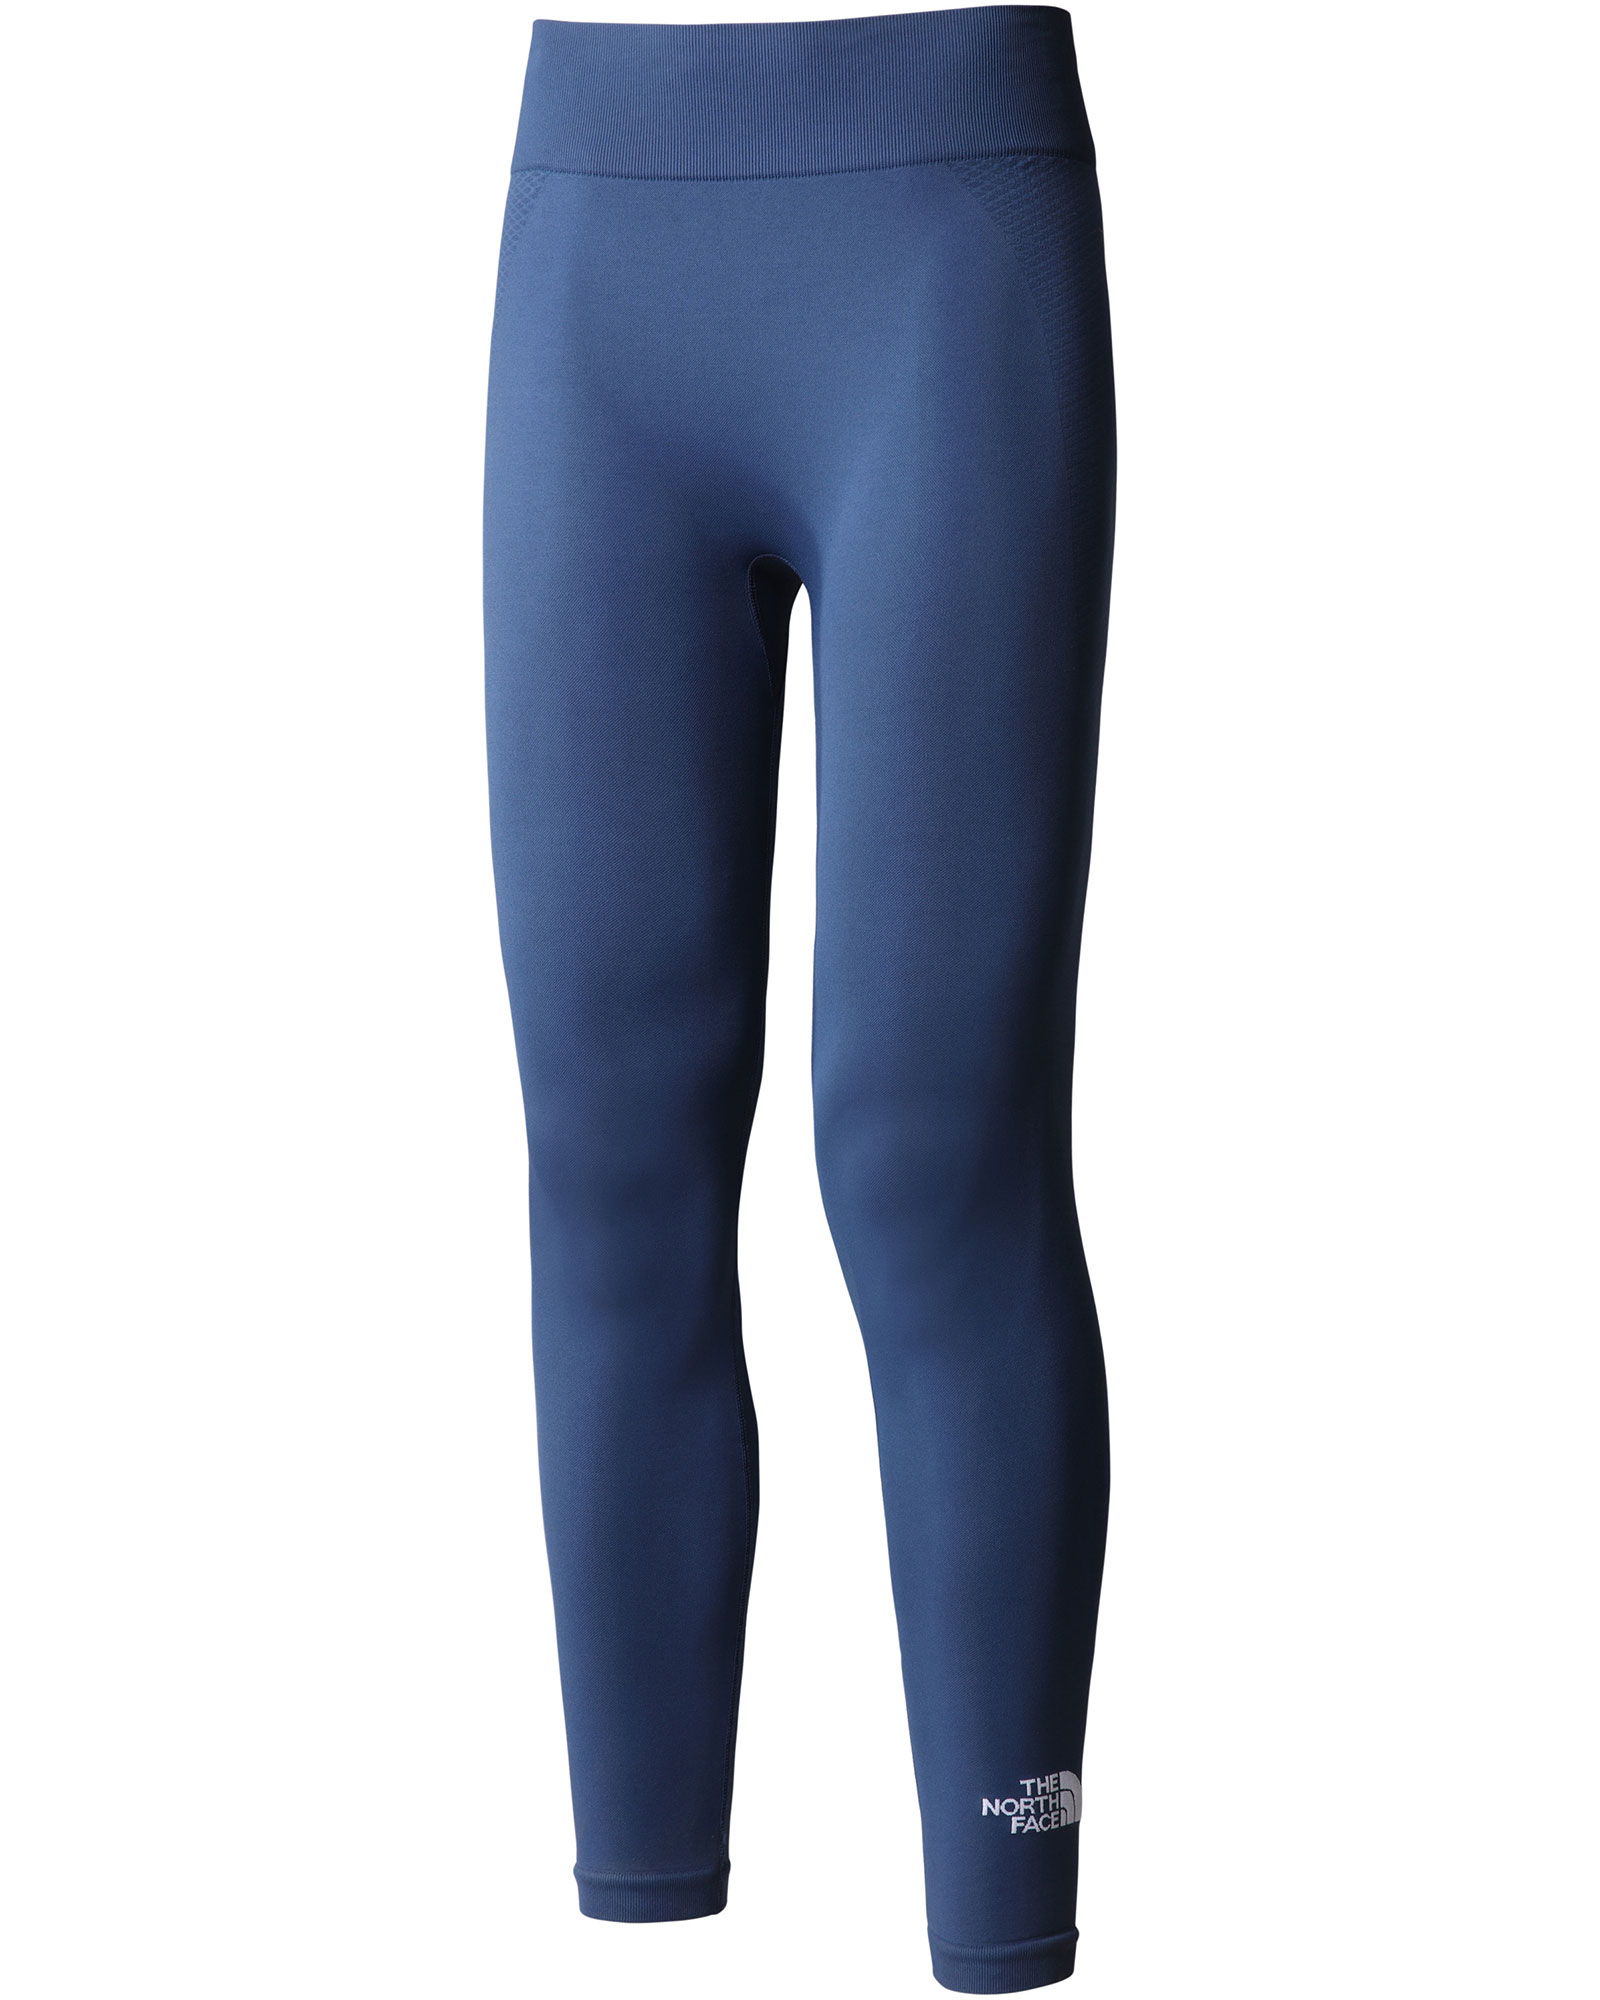 The North Face Women’s Seamless Legging - Shady Blue XS/S